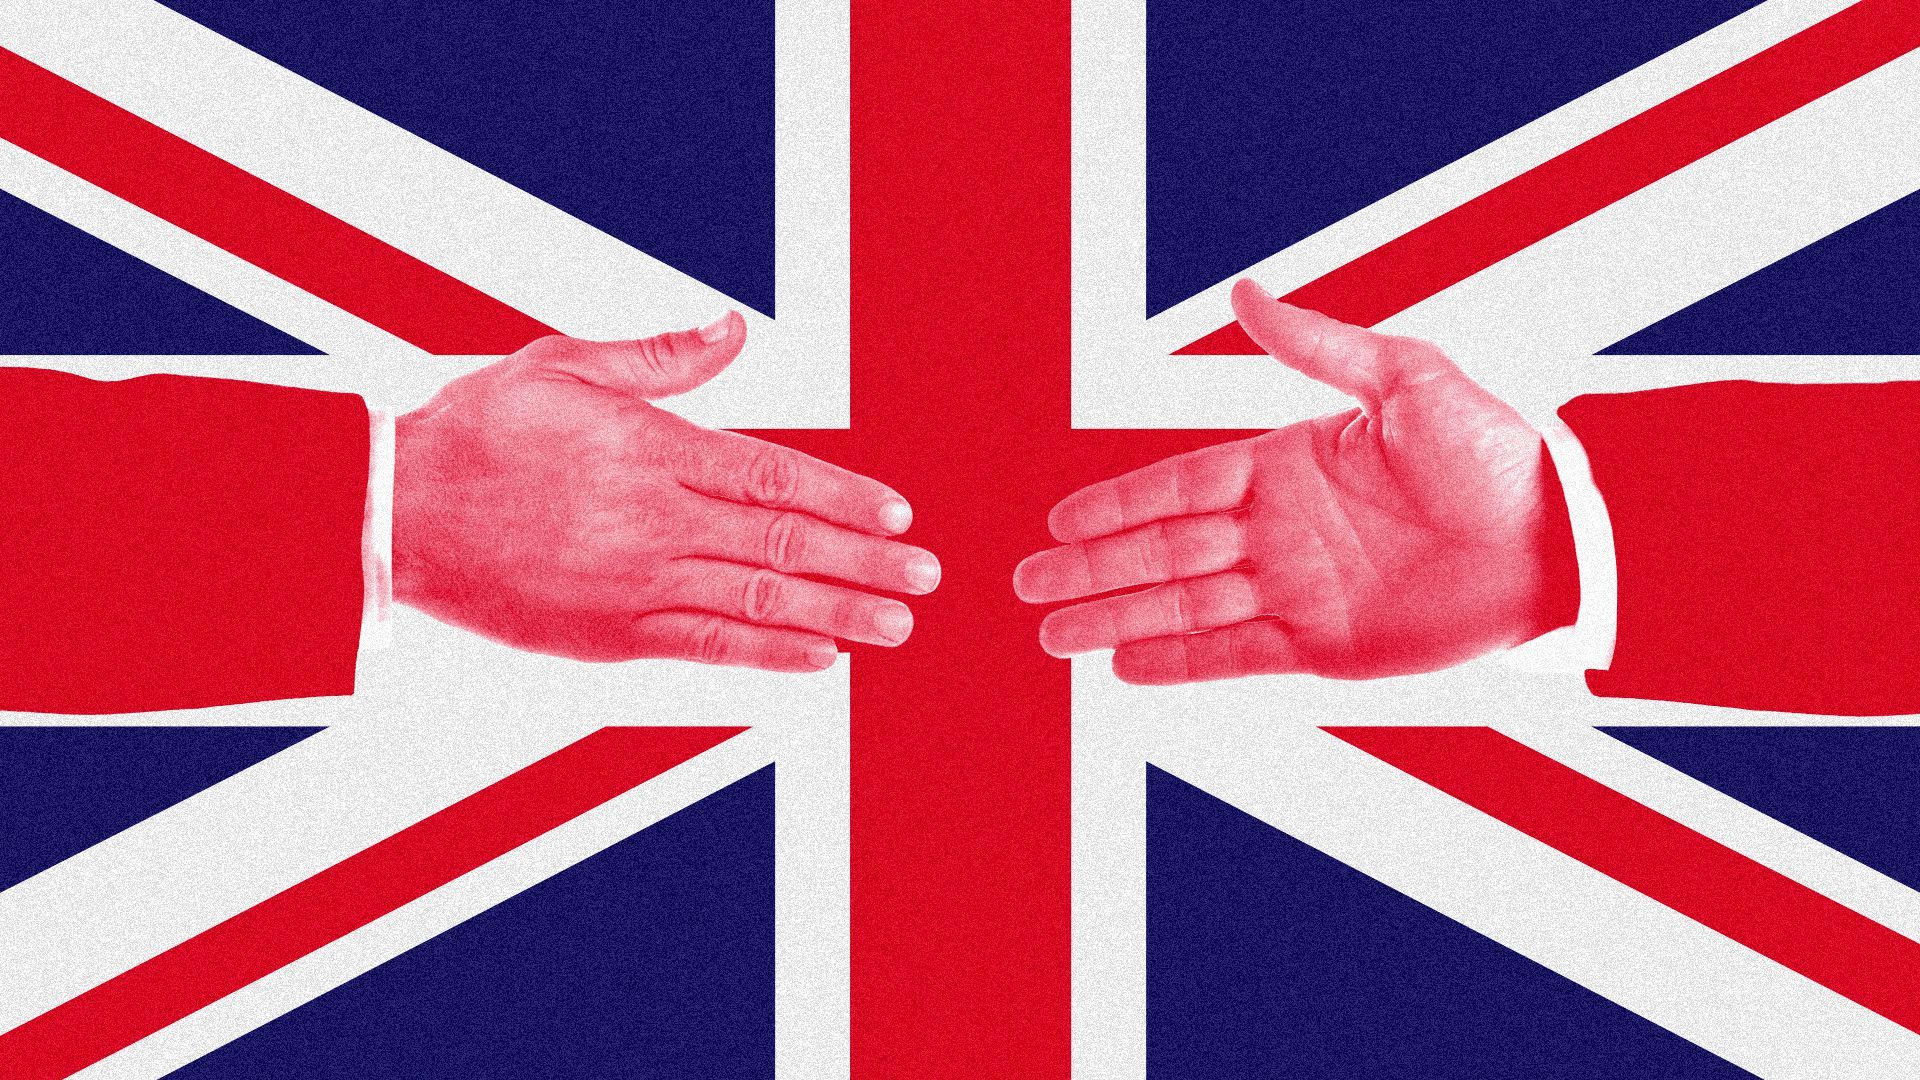 Illustration of a handshake forming part of the Union Jack.